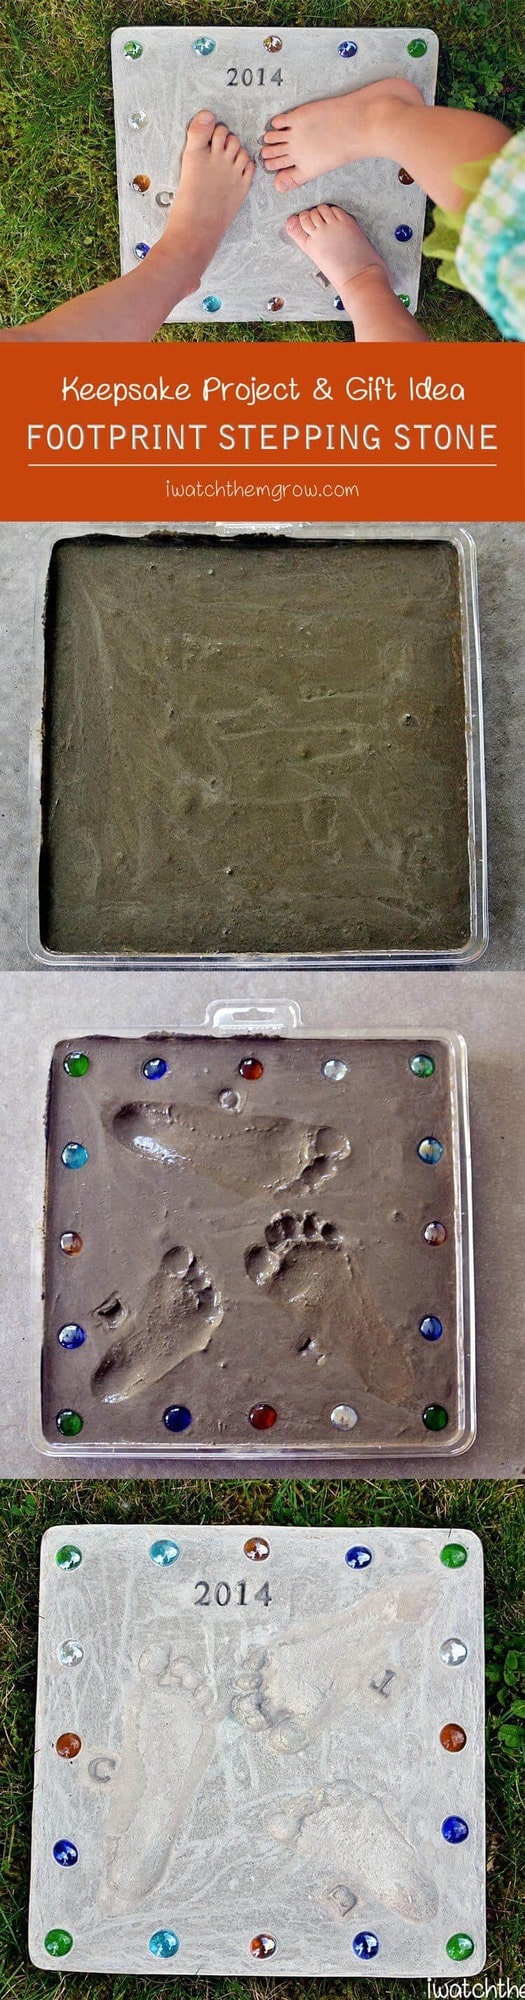 Footprint Stepping Stone for Father's Day by I Watch Them Grow 